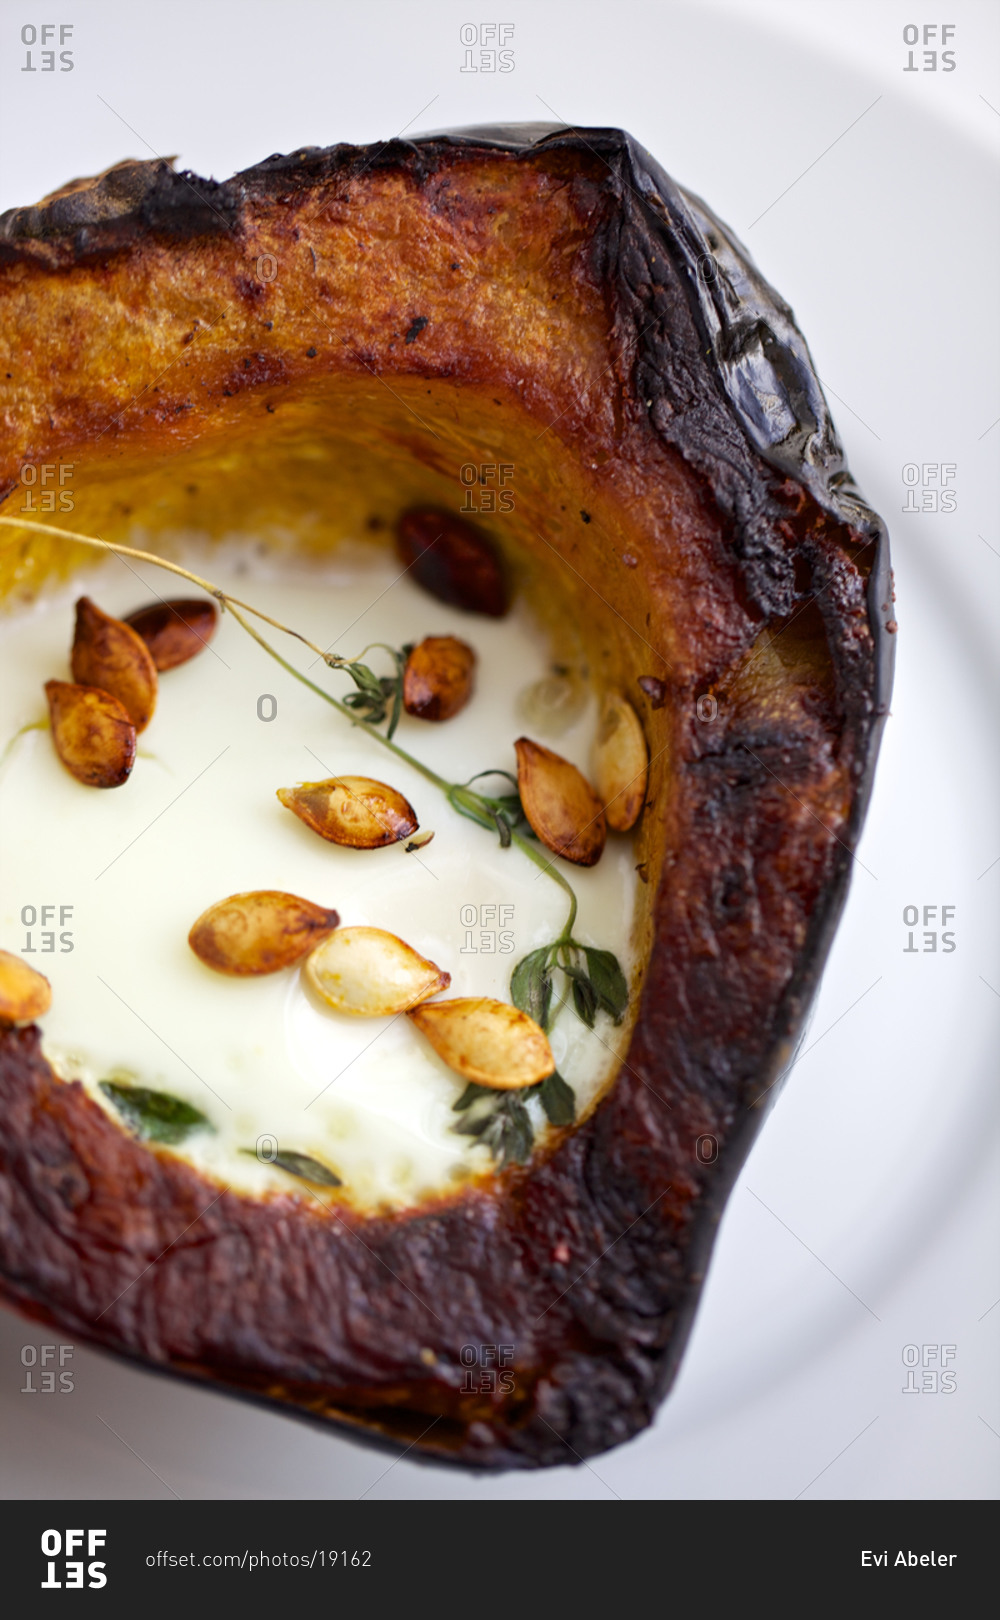 Roasted squash with egg and roasted squash seeds